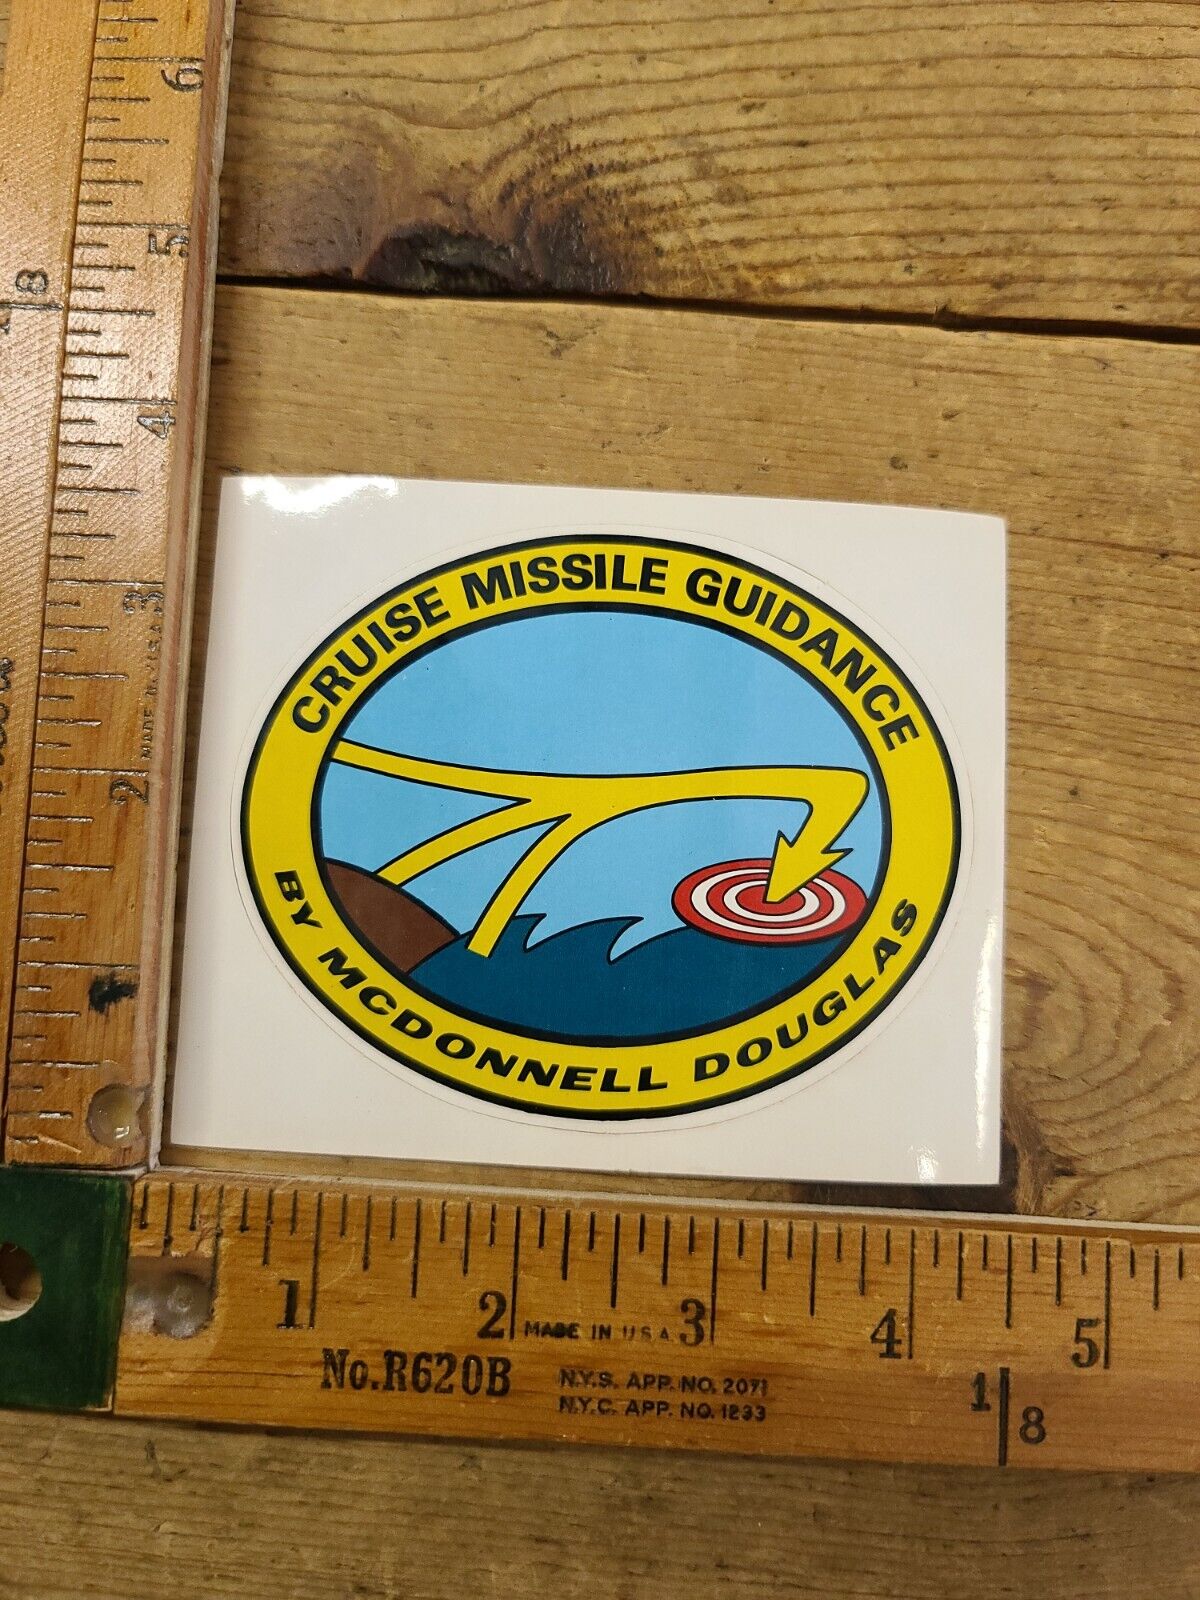 Vintage McDonnell Douglas Aerospace Cruise Missile Guidance decal